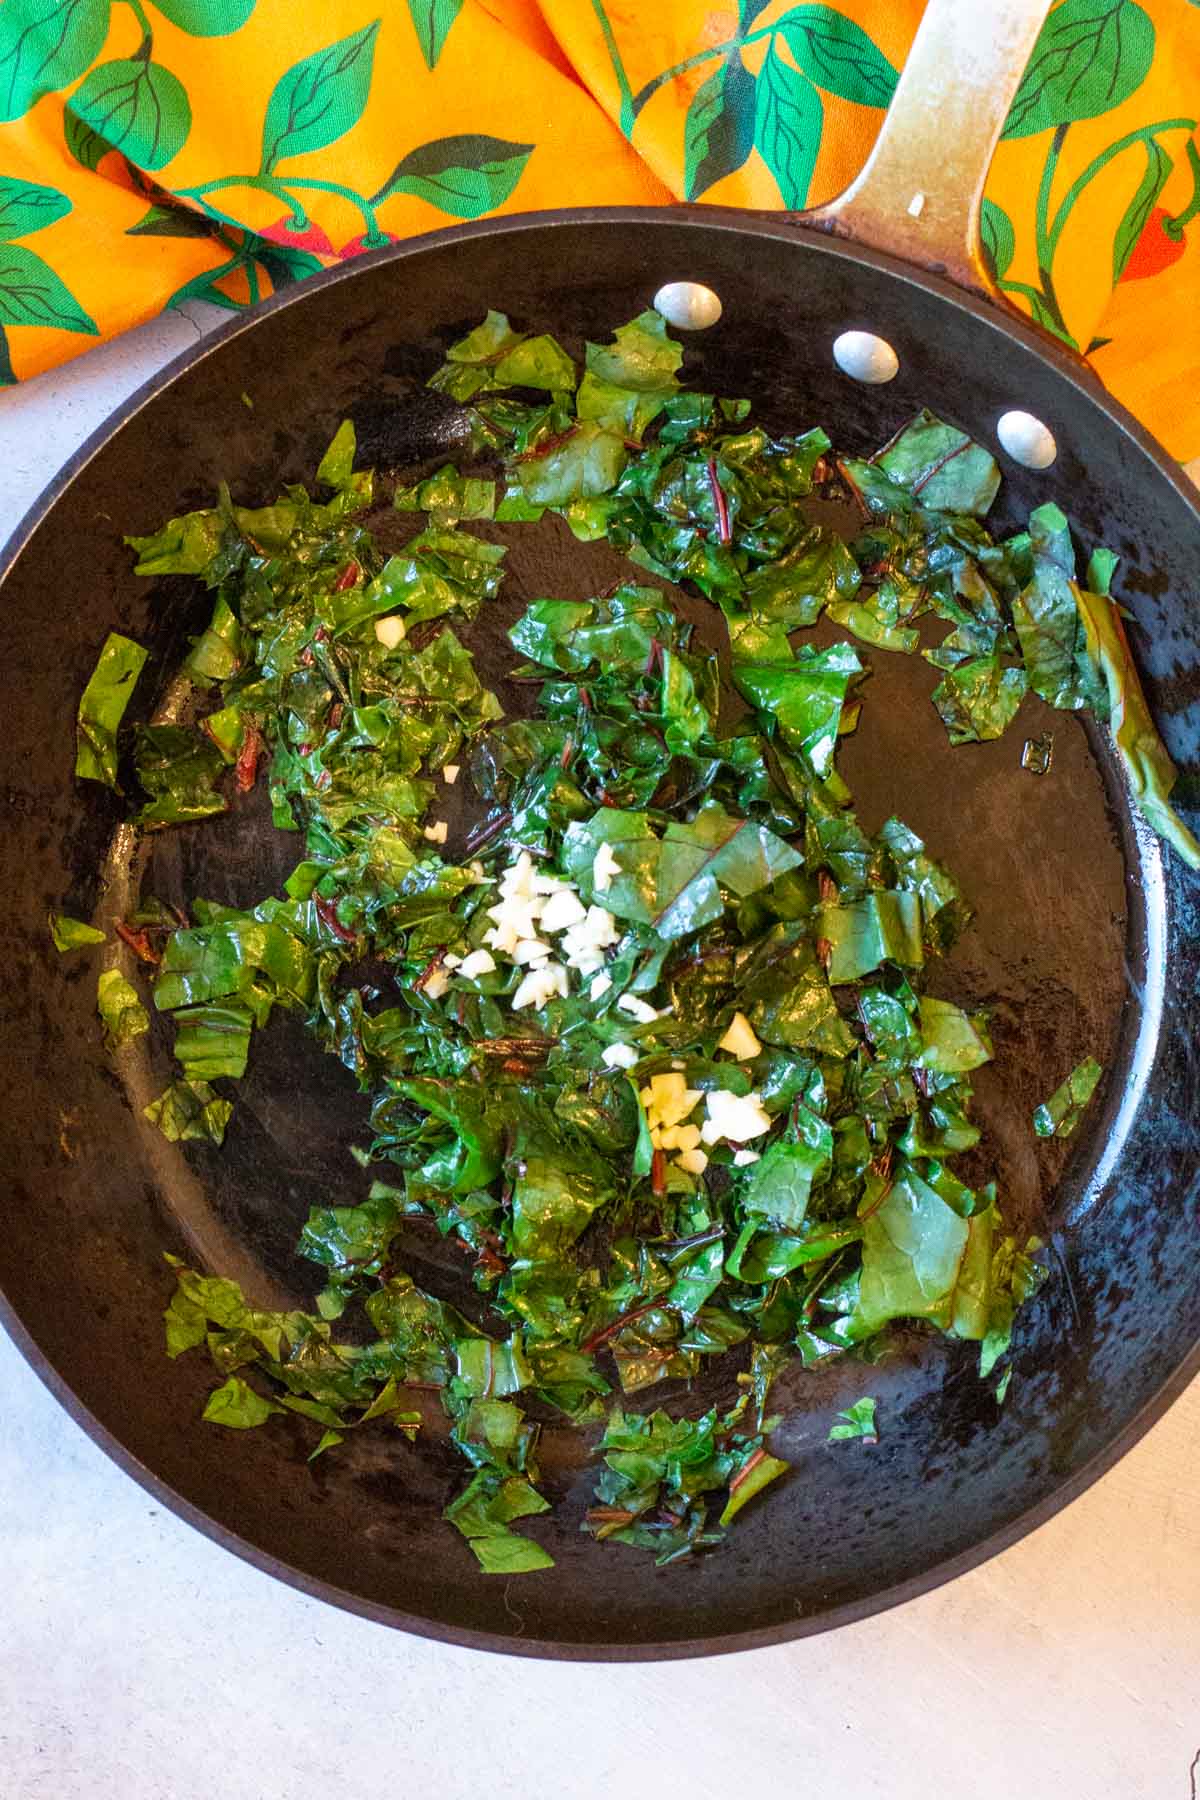 Cooking chopped Swiss chard in a fry pan with garlic.